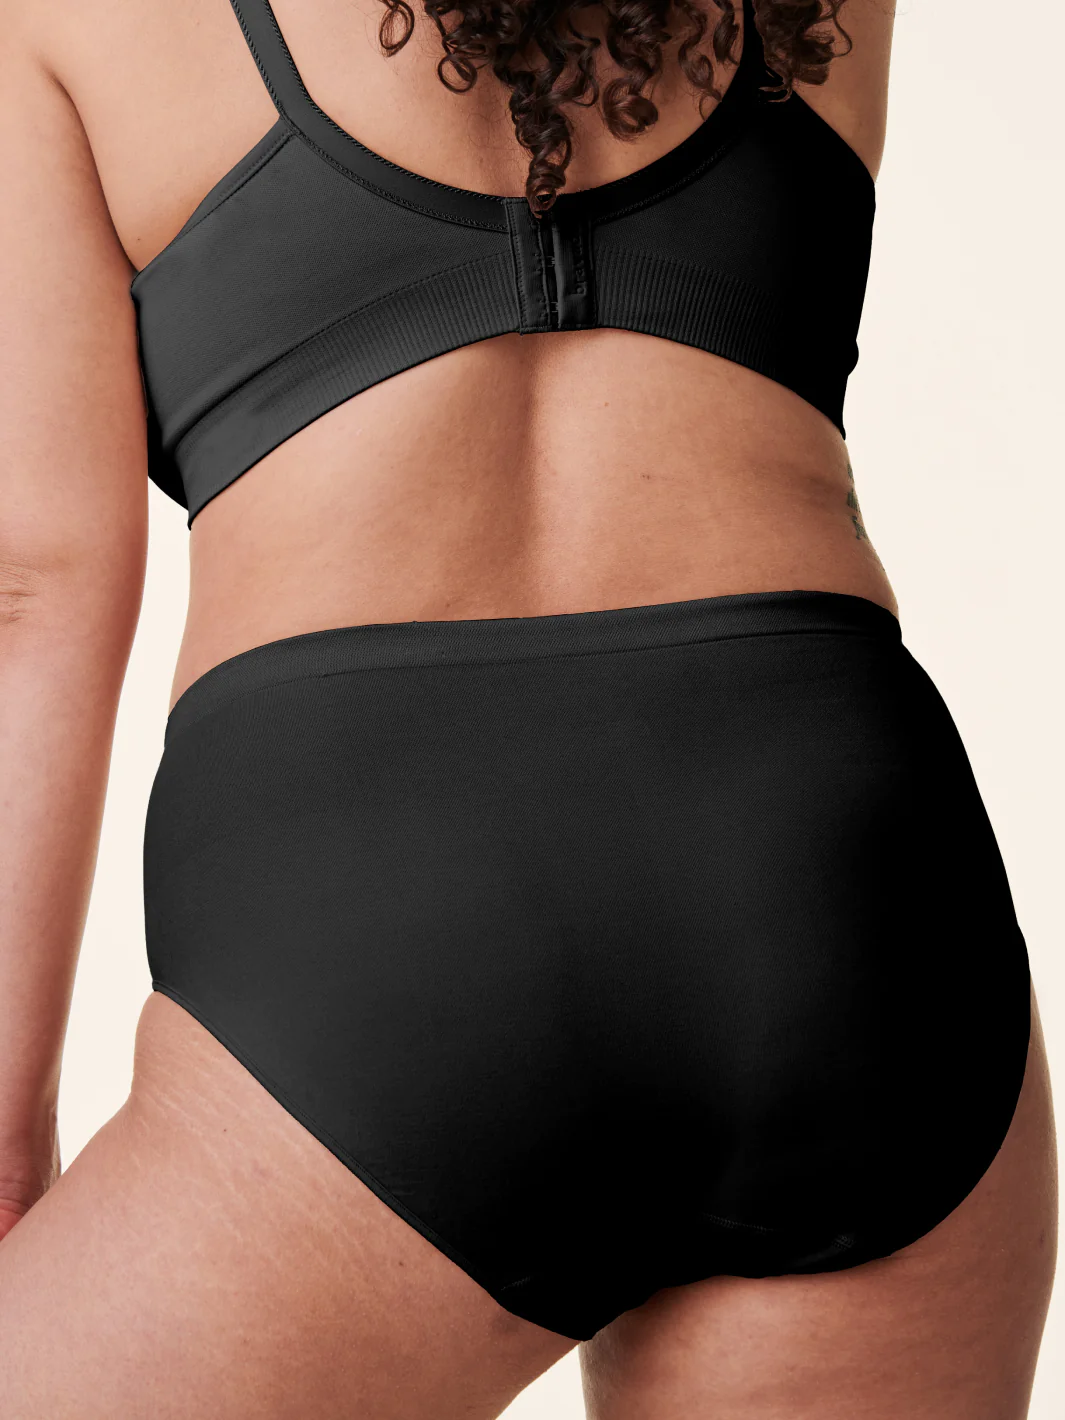 12 Of The Best Undergarments For Winter To You Keep Cozy 39 Daily Mom, Magazine For Families